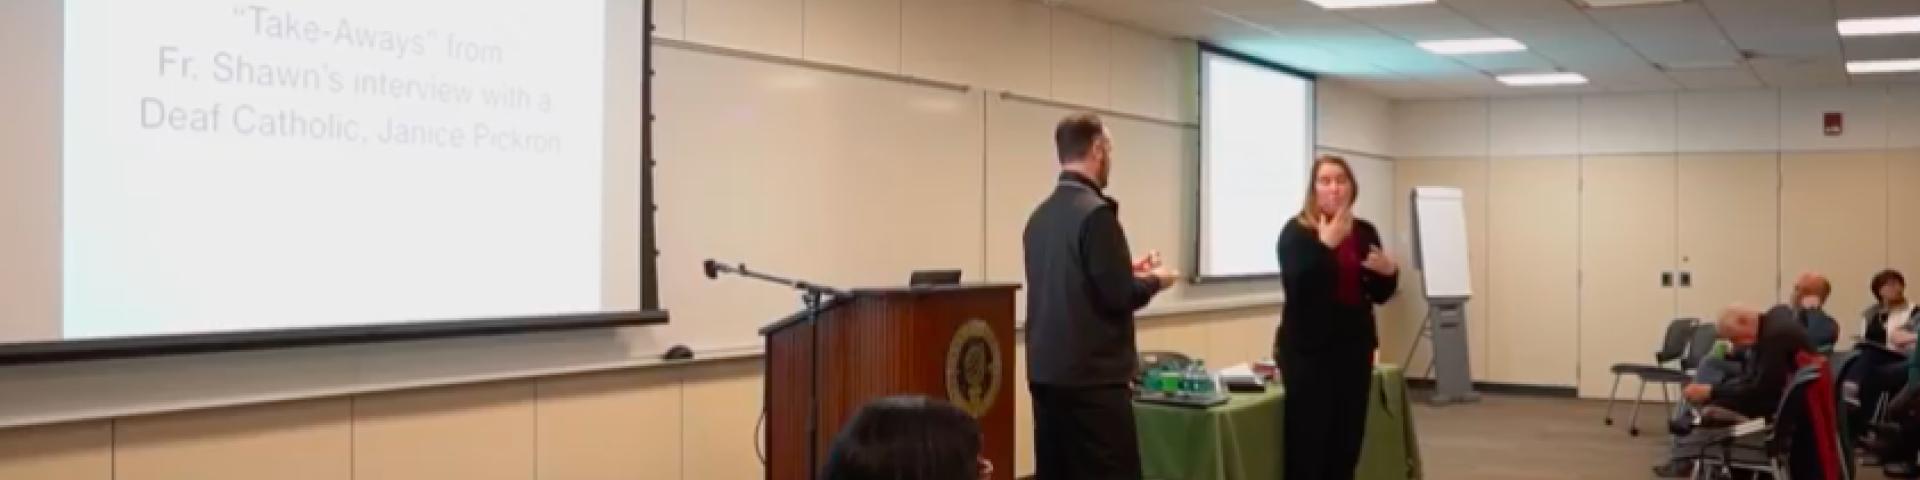 Picture of Shawn Carey giving a lecture 